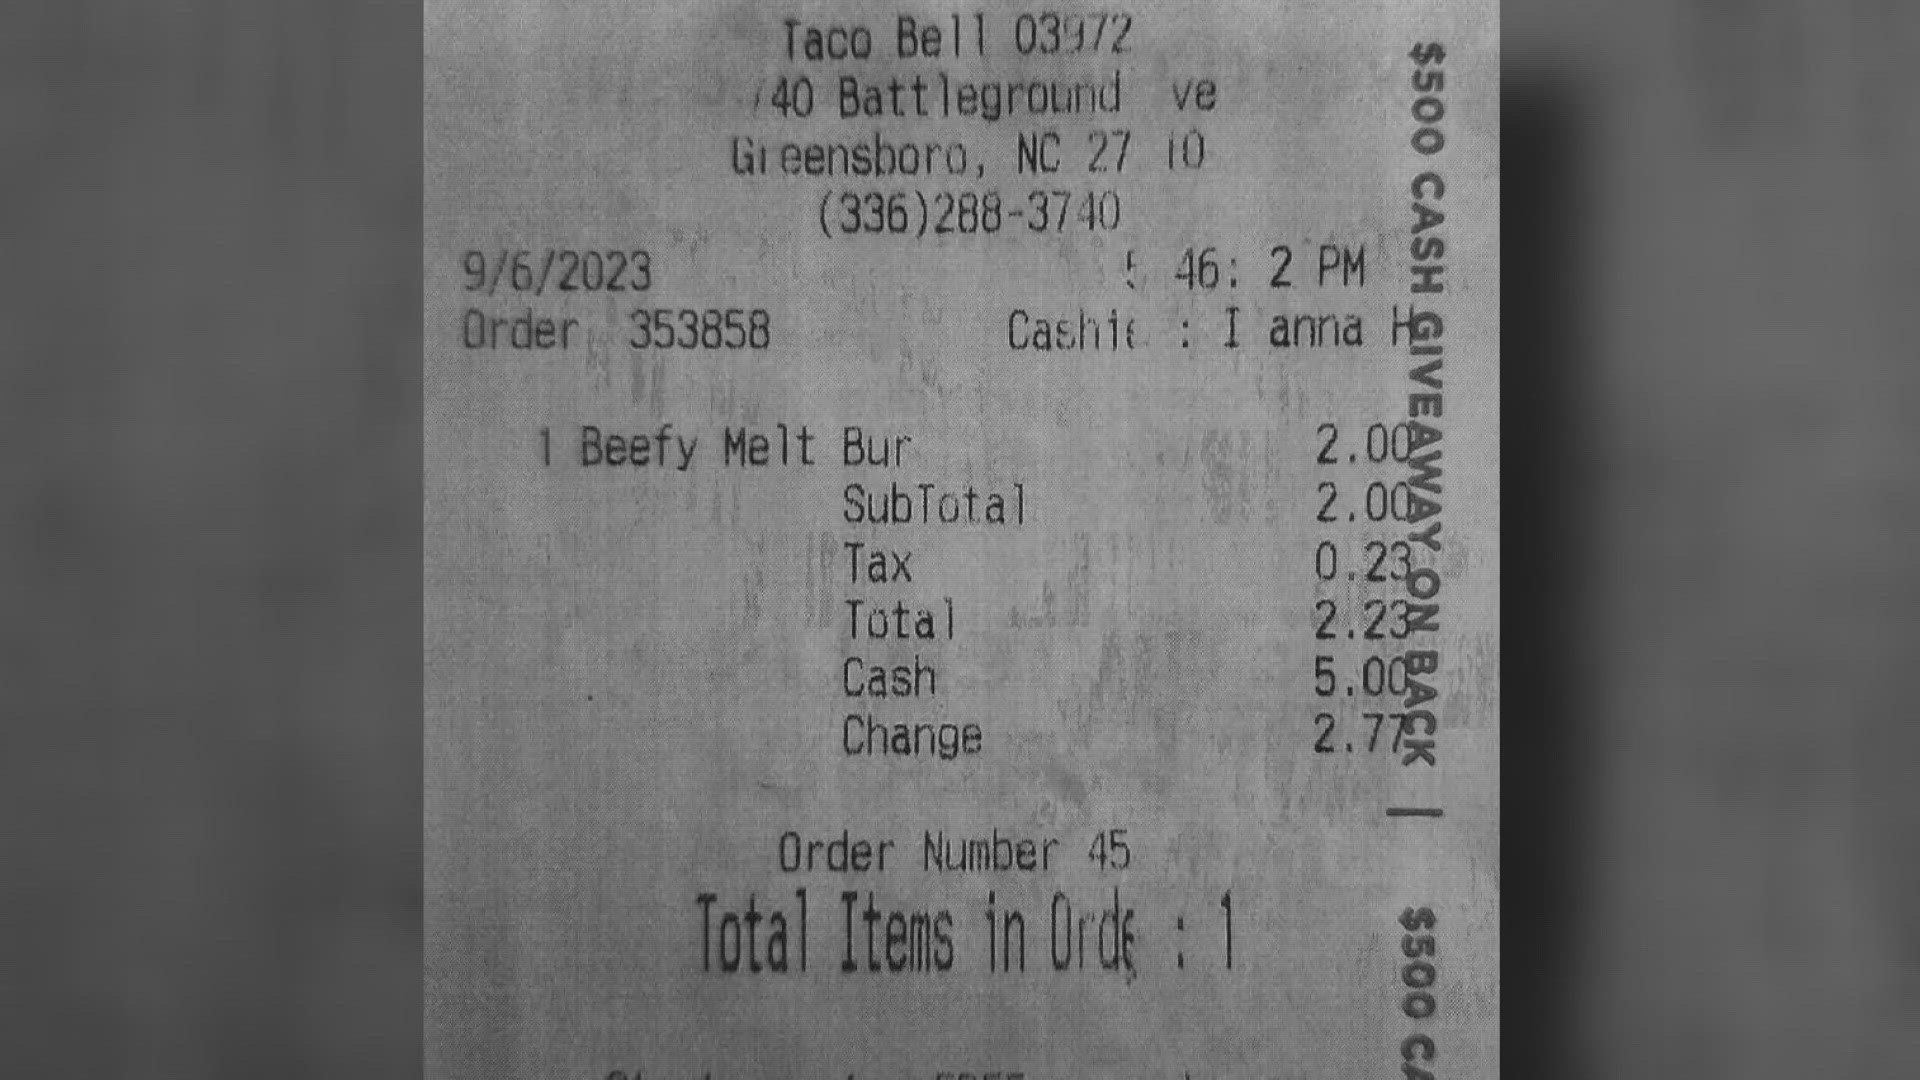 Someone was charged too much in tax fees at a Taco Bell.